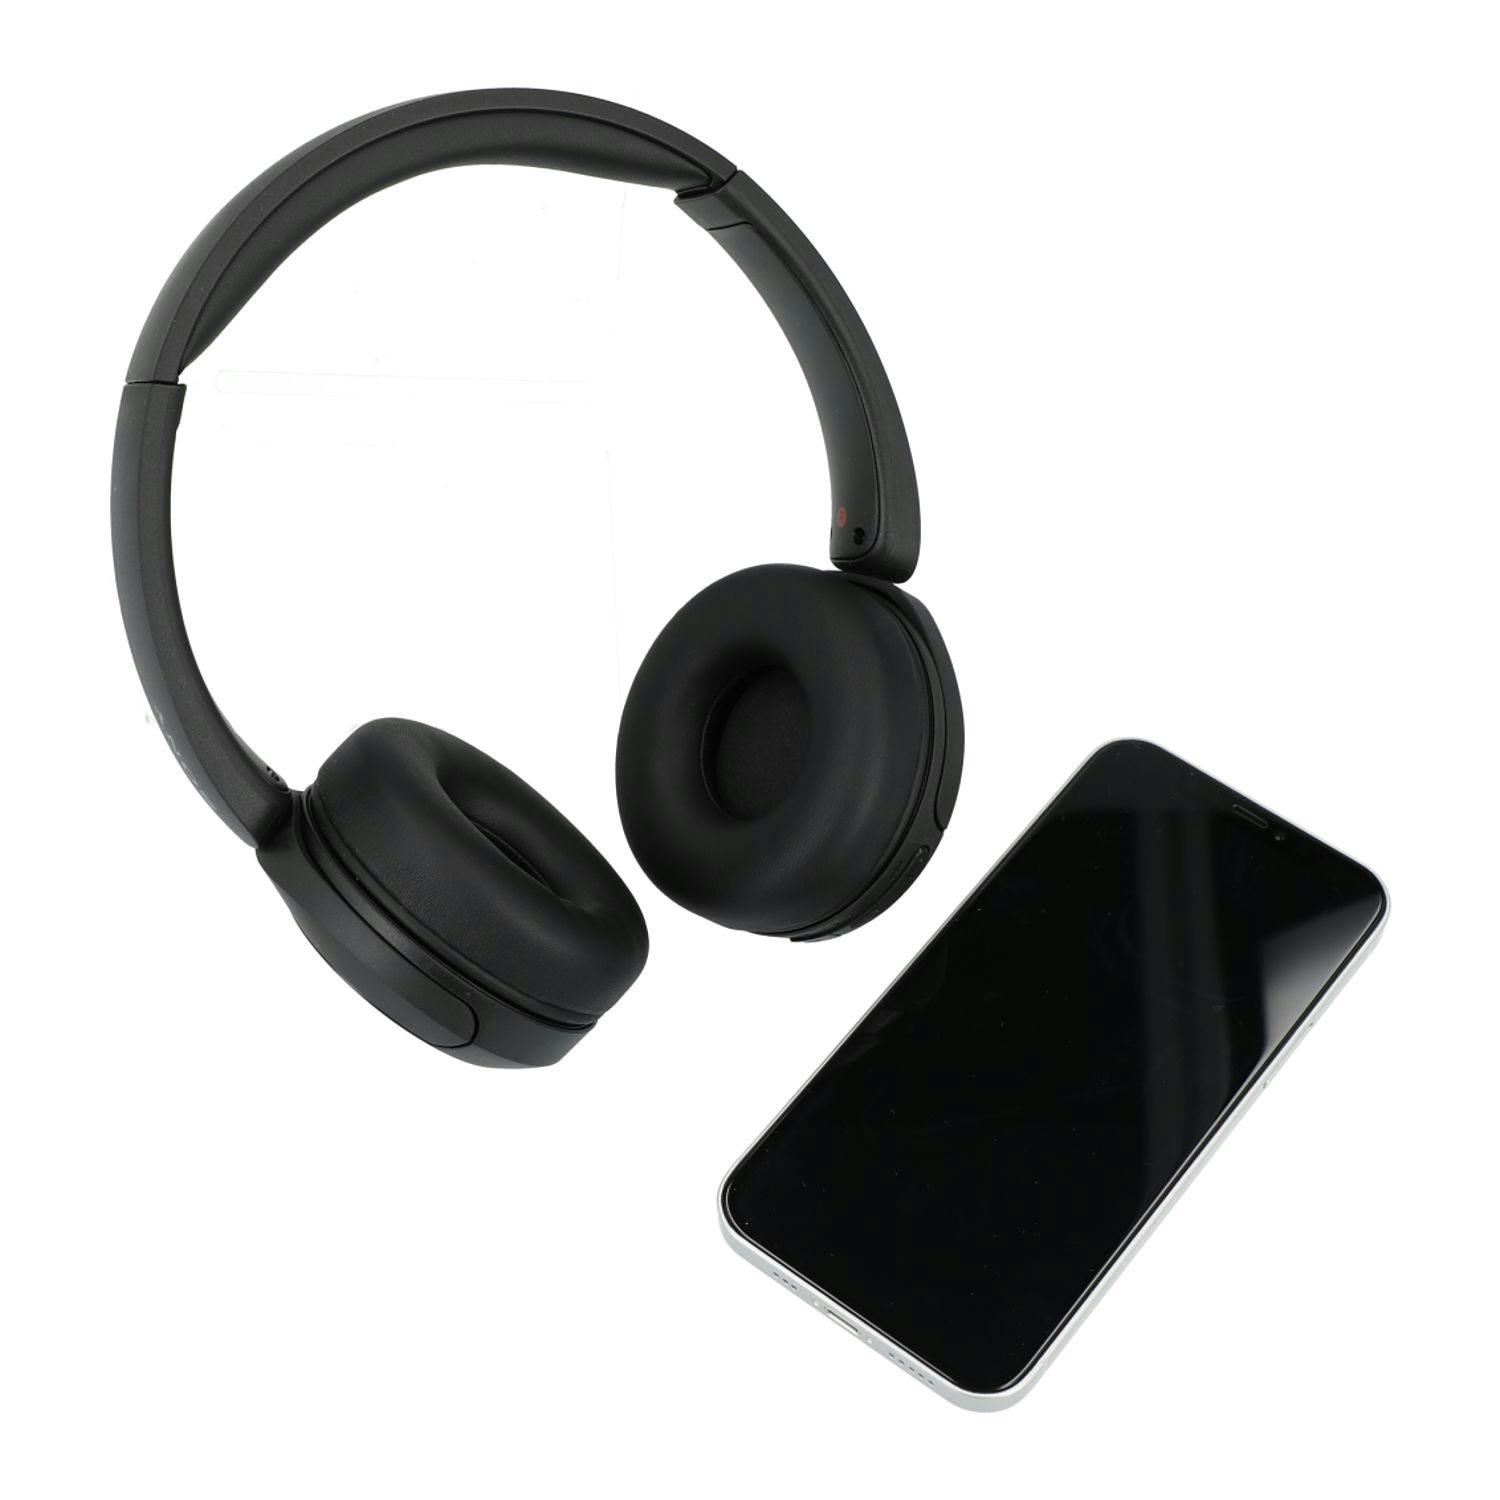 Sony WH-CH520 Wireless Headphones with Microphone - additional Image 3